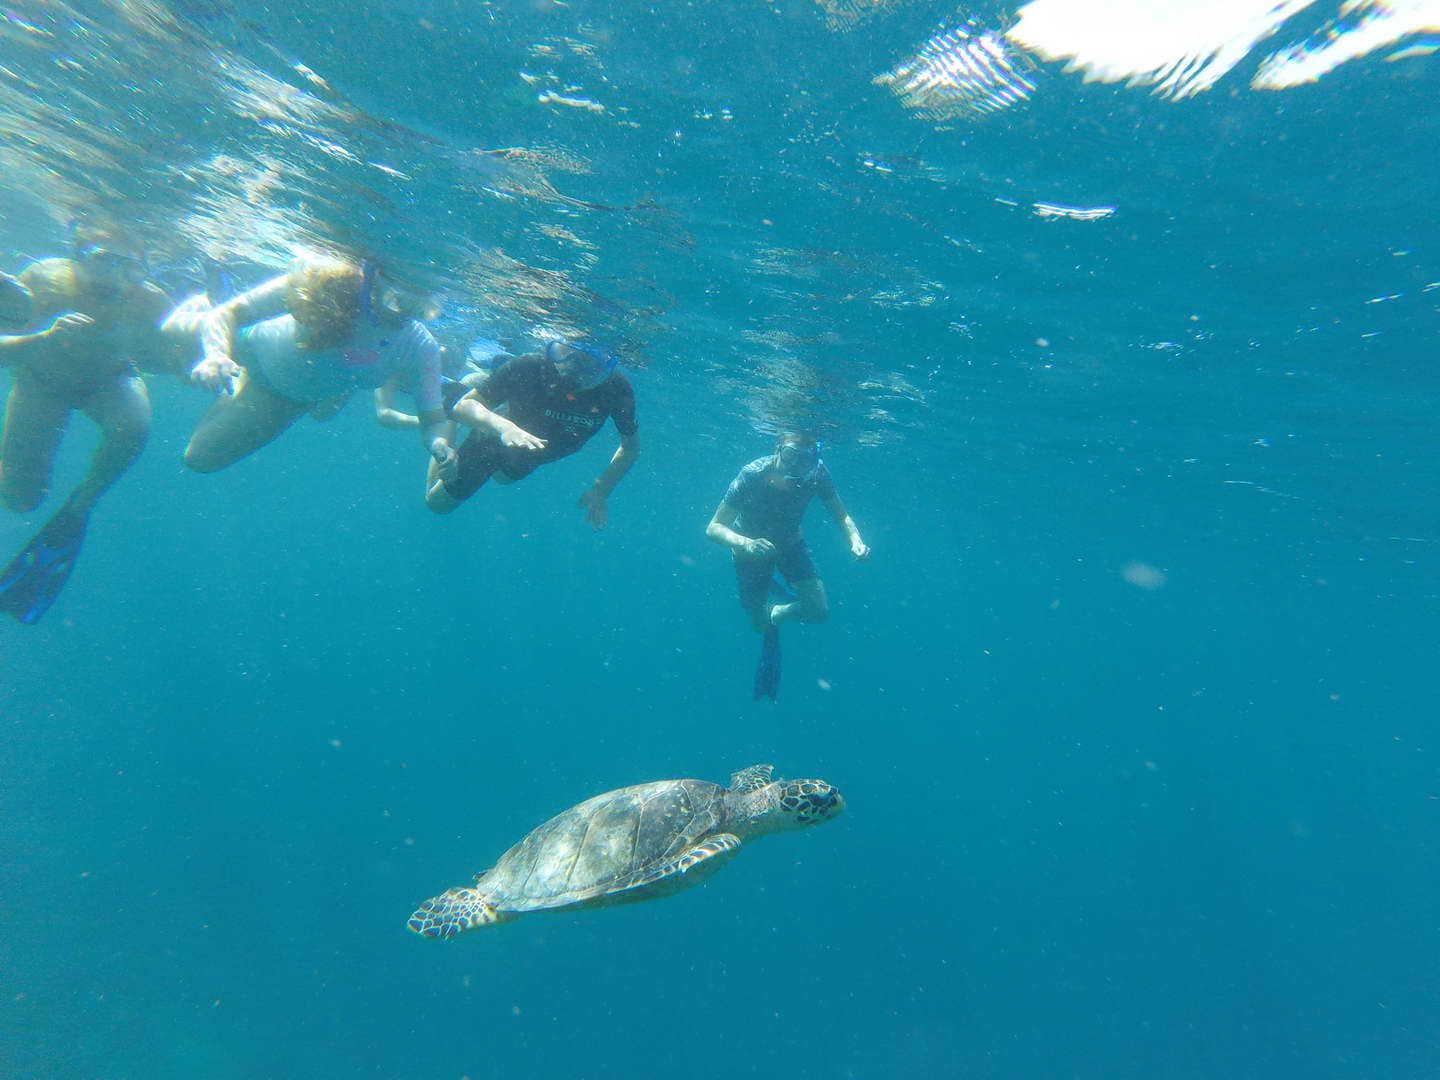 Turtles survey in the Maldives